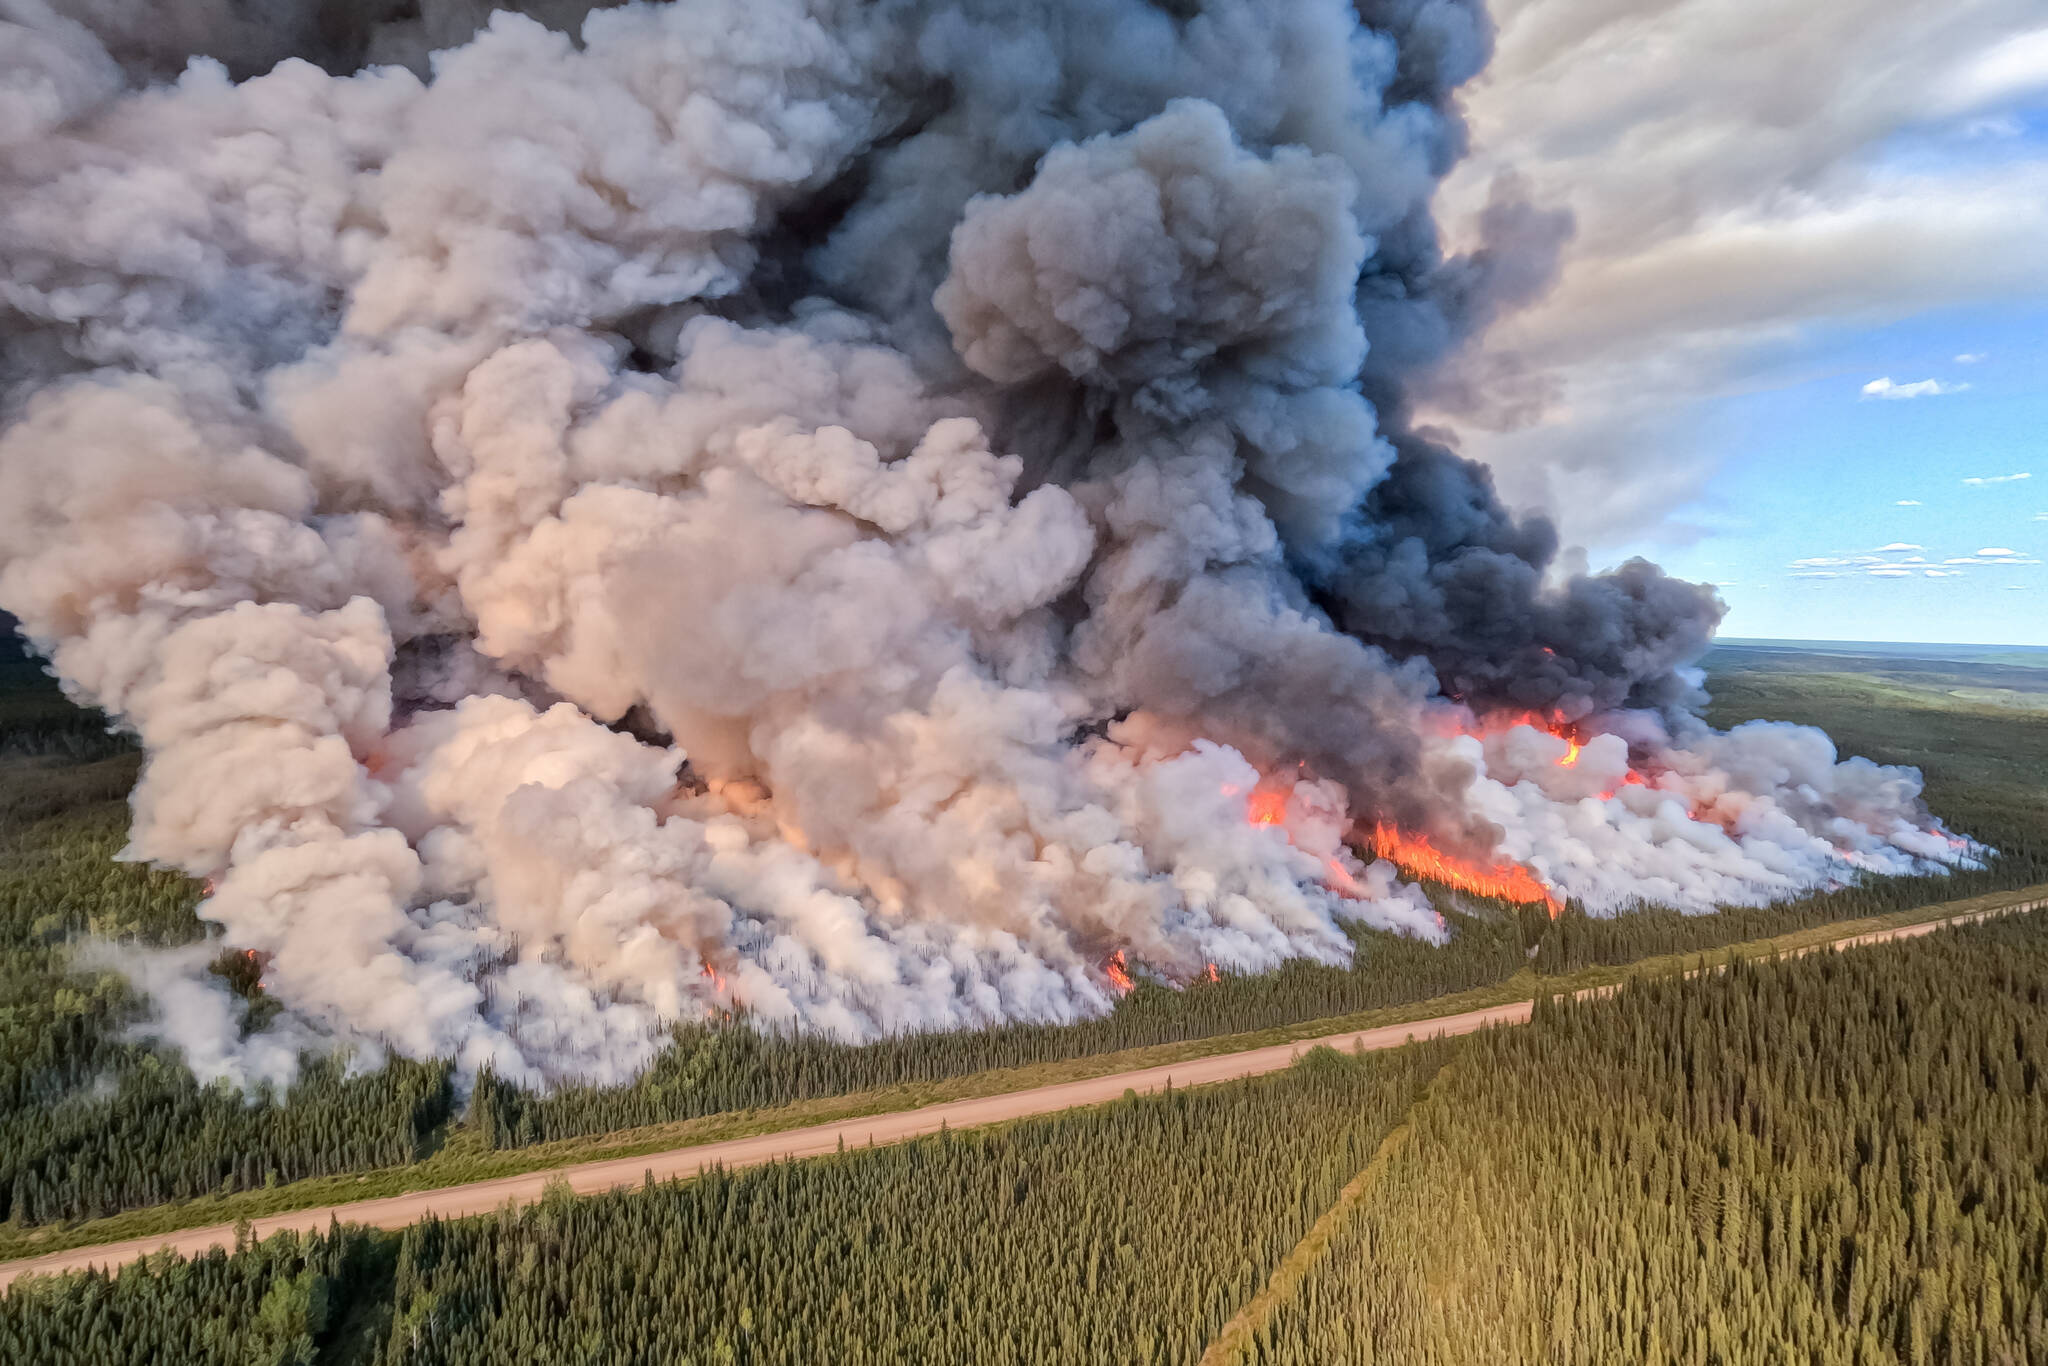 The Donnie Creek wildfire burns in an area between Fort Nelson and Fort St. John, B.C. in this undated handout photo provided by the BC Wildfire Service. THE CANADIAN PRESS/HO-BC Wildfire Service